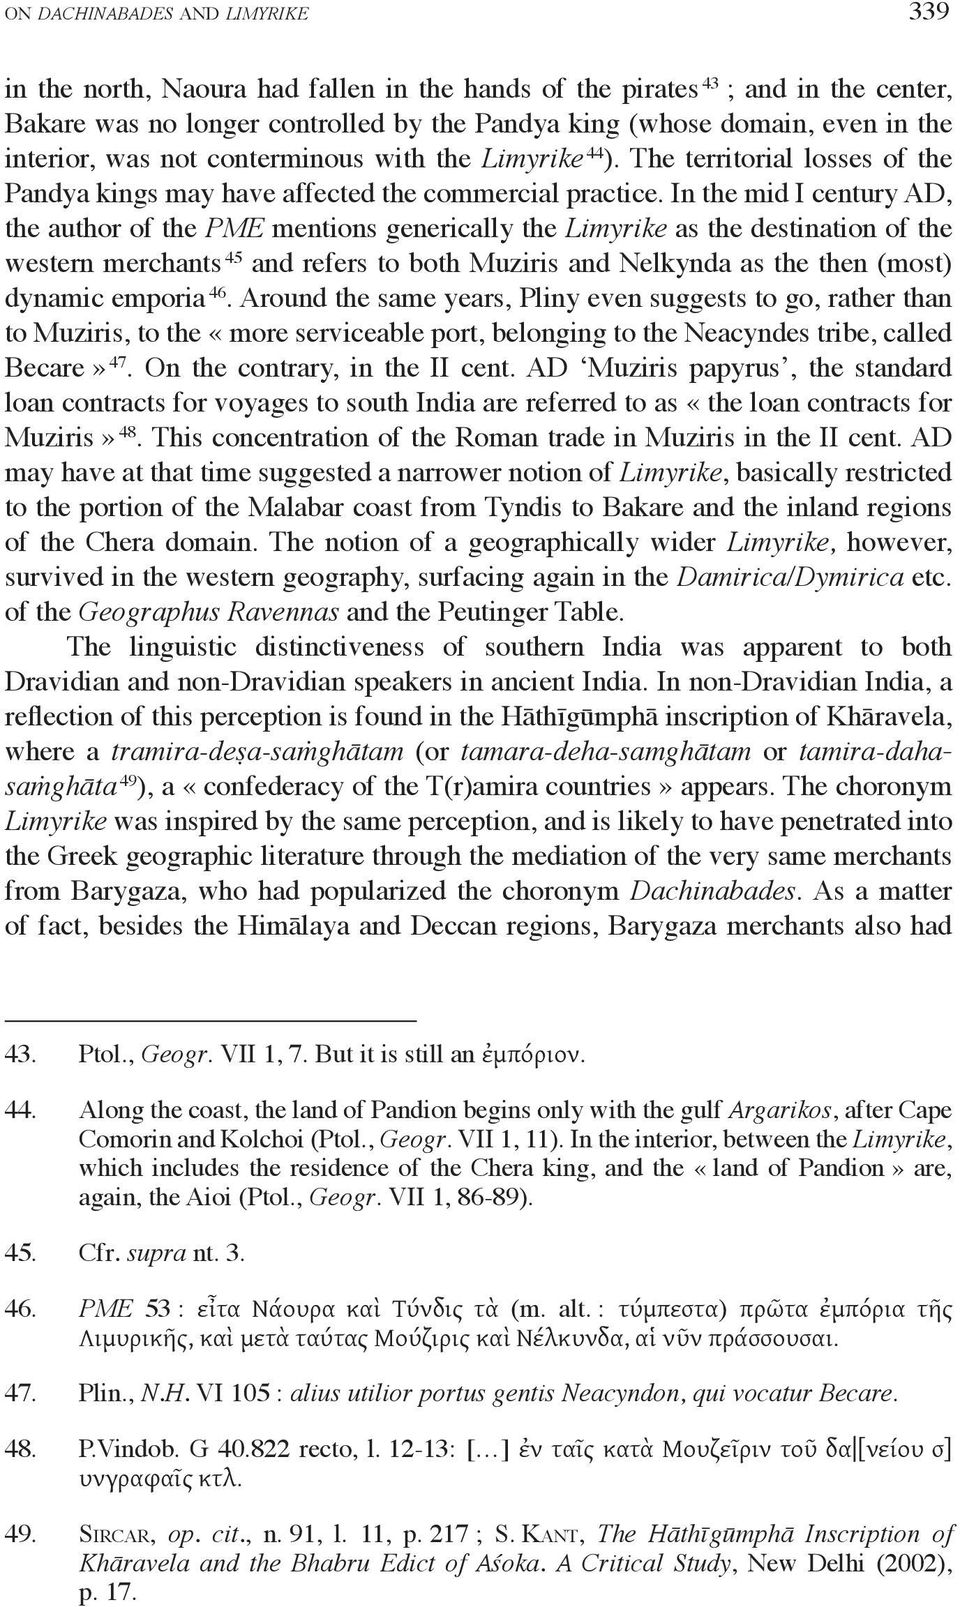 In the mid I century AD, the author of the PME mentions generically the Limyrike as the destination of the western merchants 45 and refers to both Muziris and Nelkynda as the then (most) dynamic